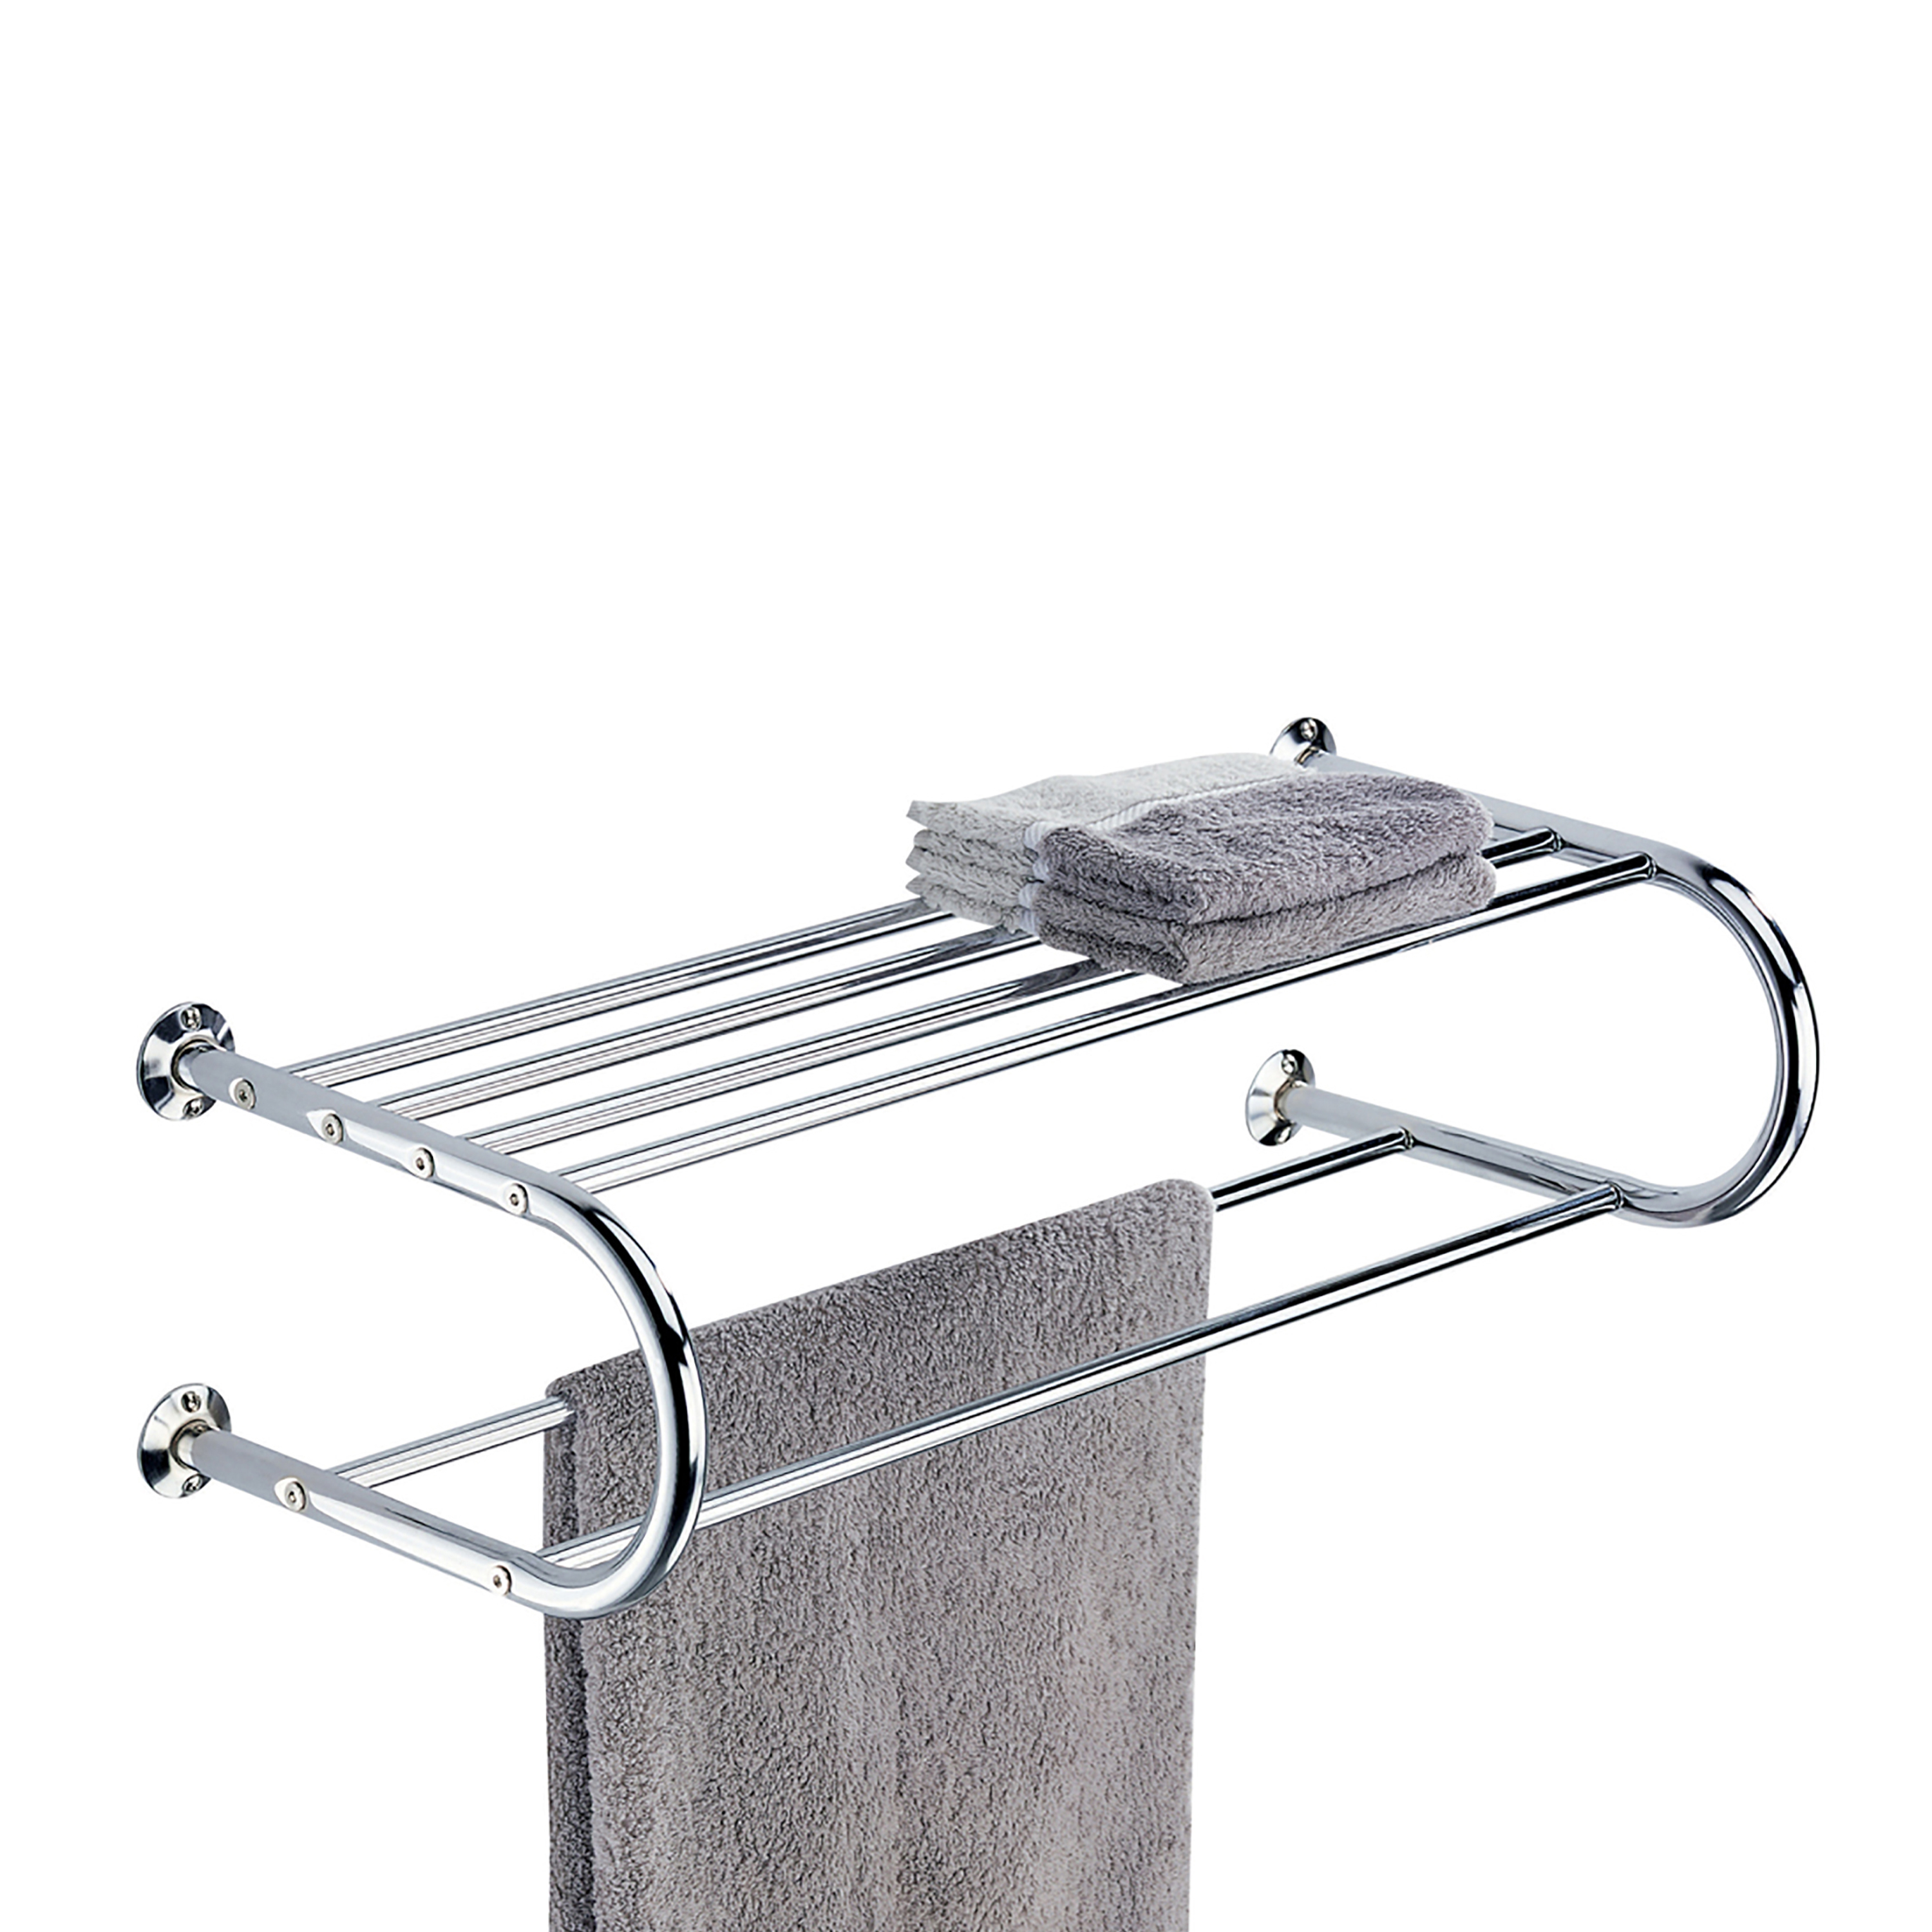 Organize It All Wall Mounted Bath Shelf with Towel Bar in Chrome - image 1 of 6